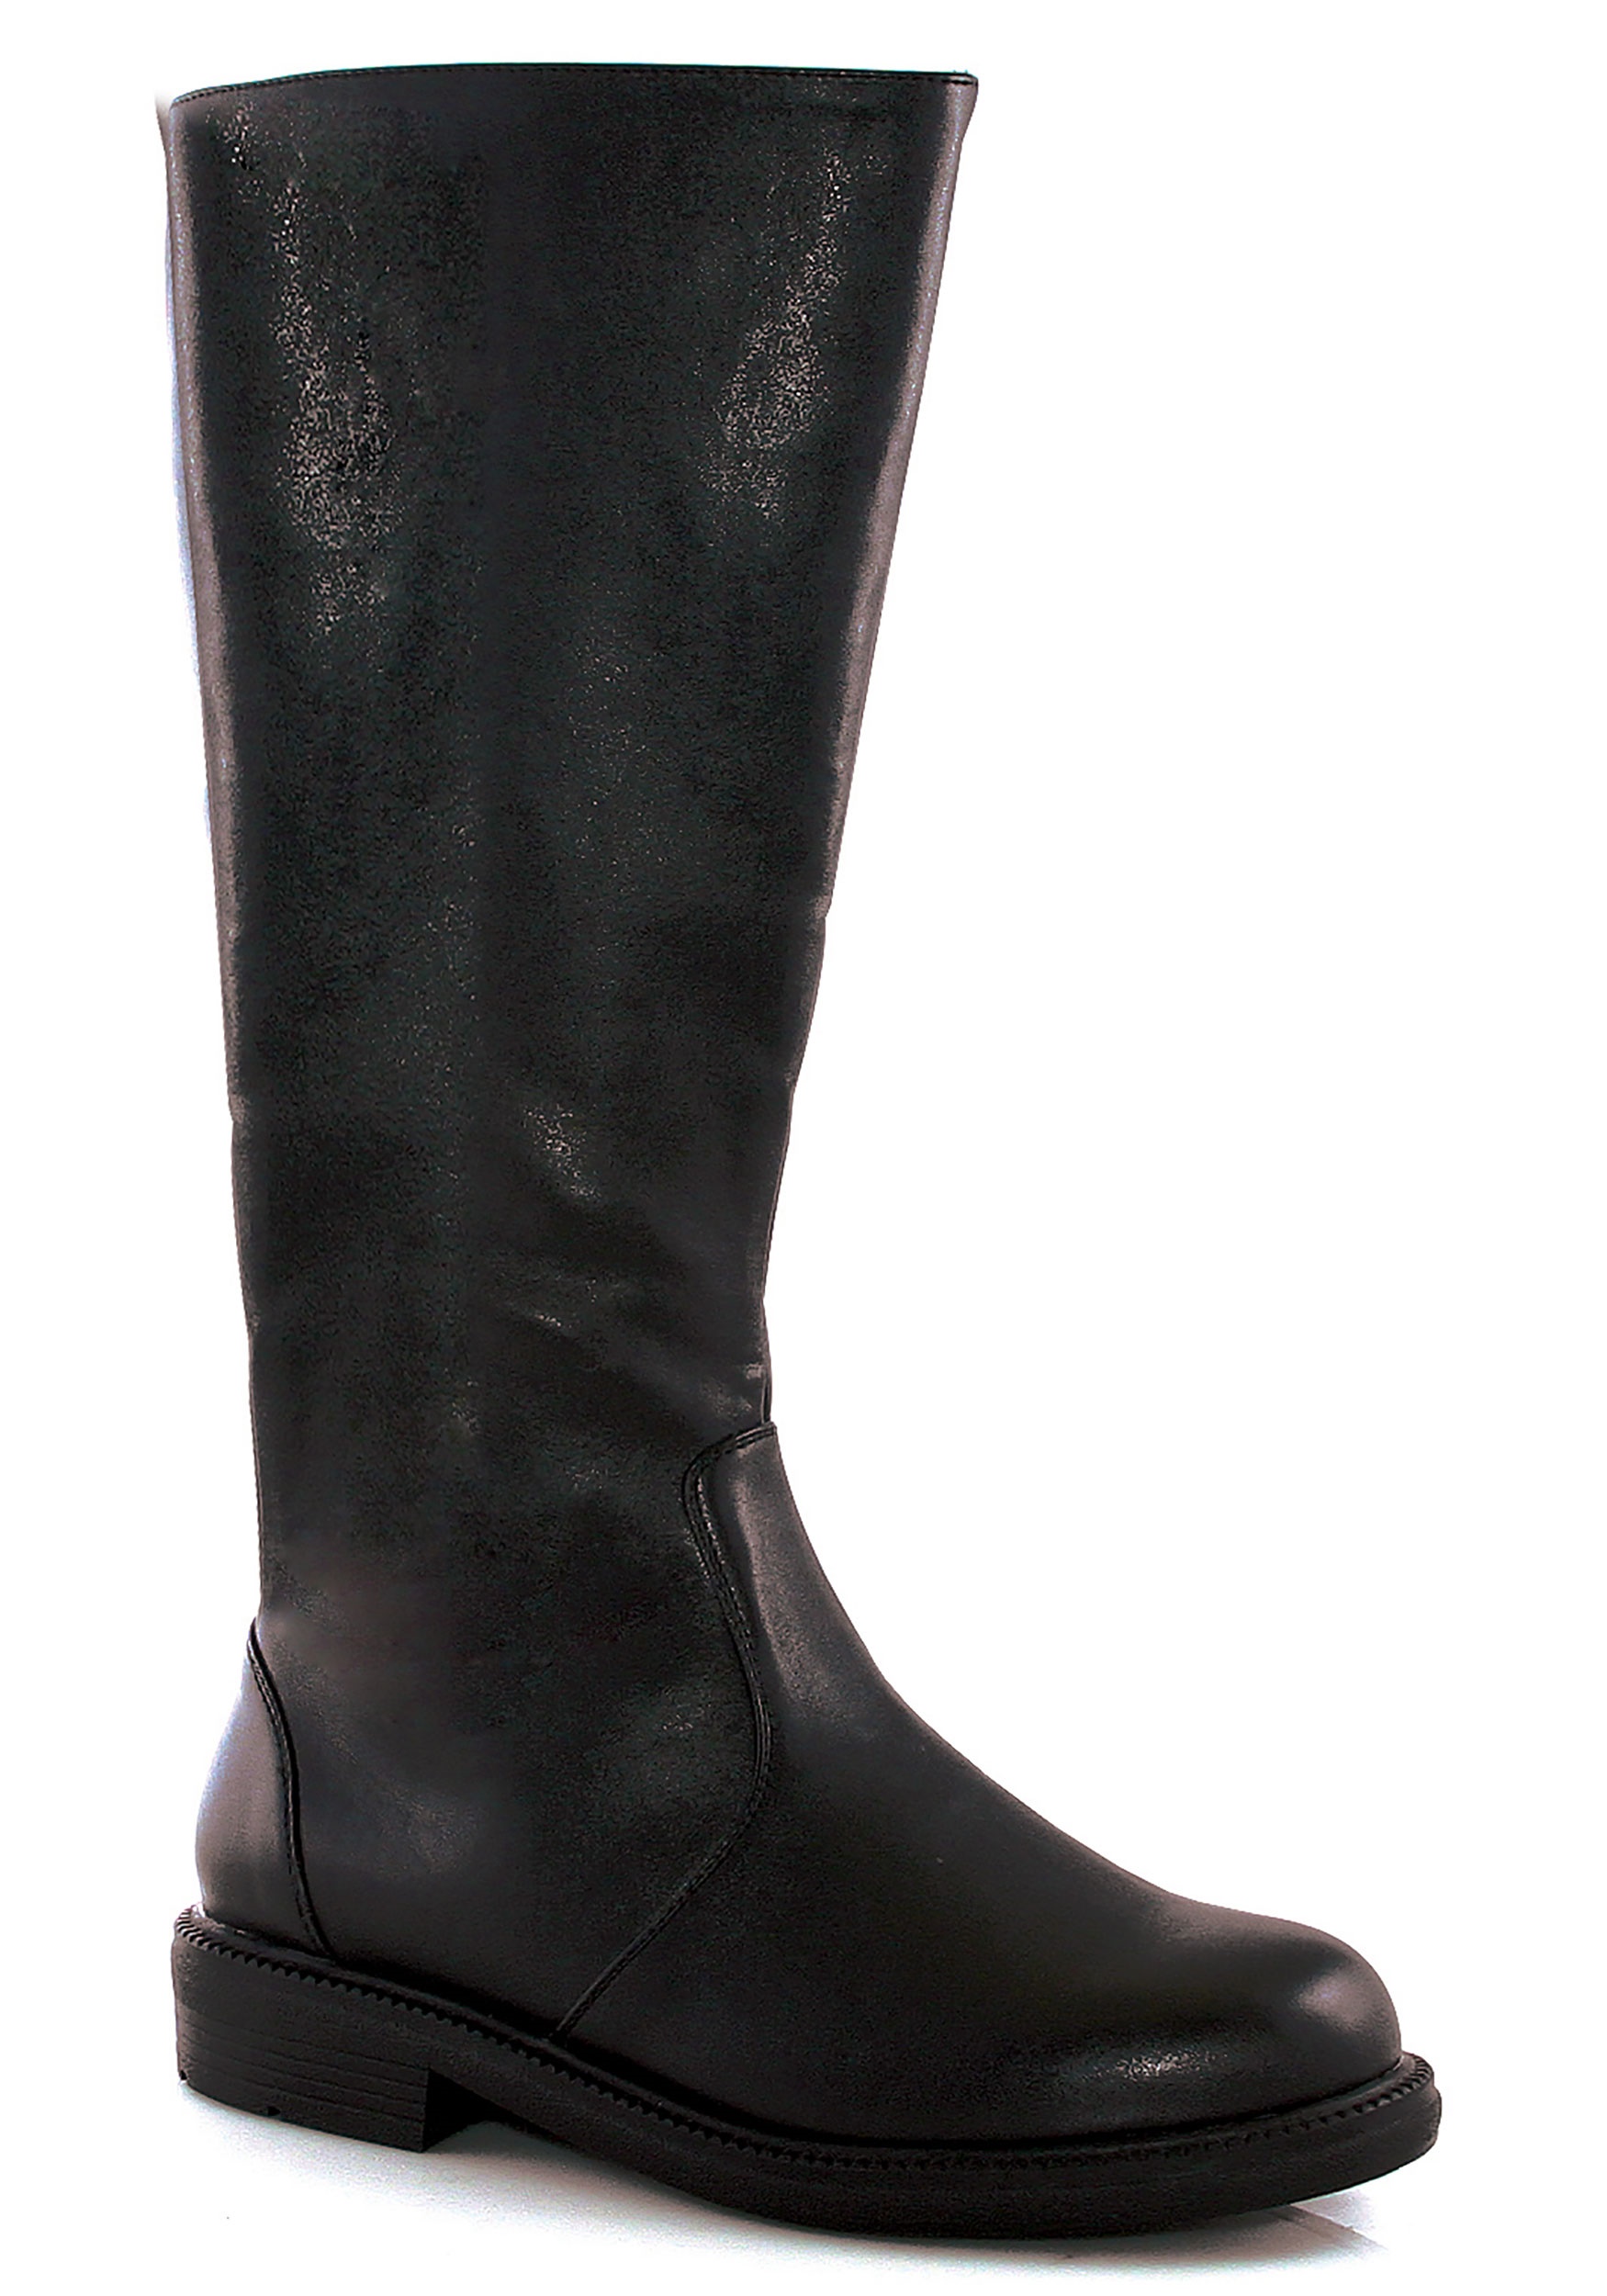 Tall Black Costume Boots for Men